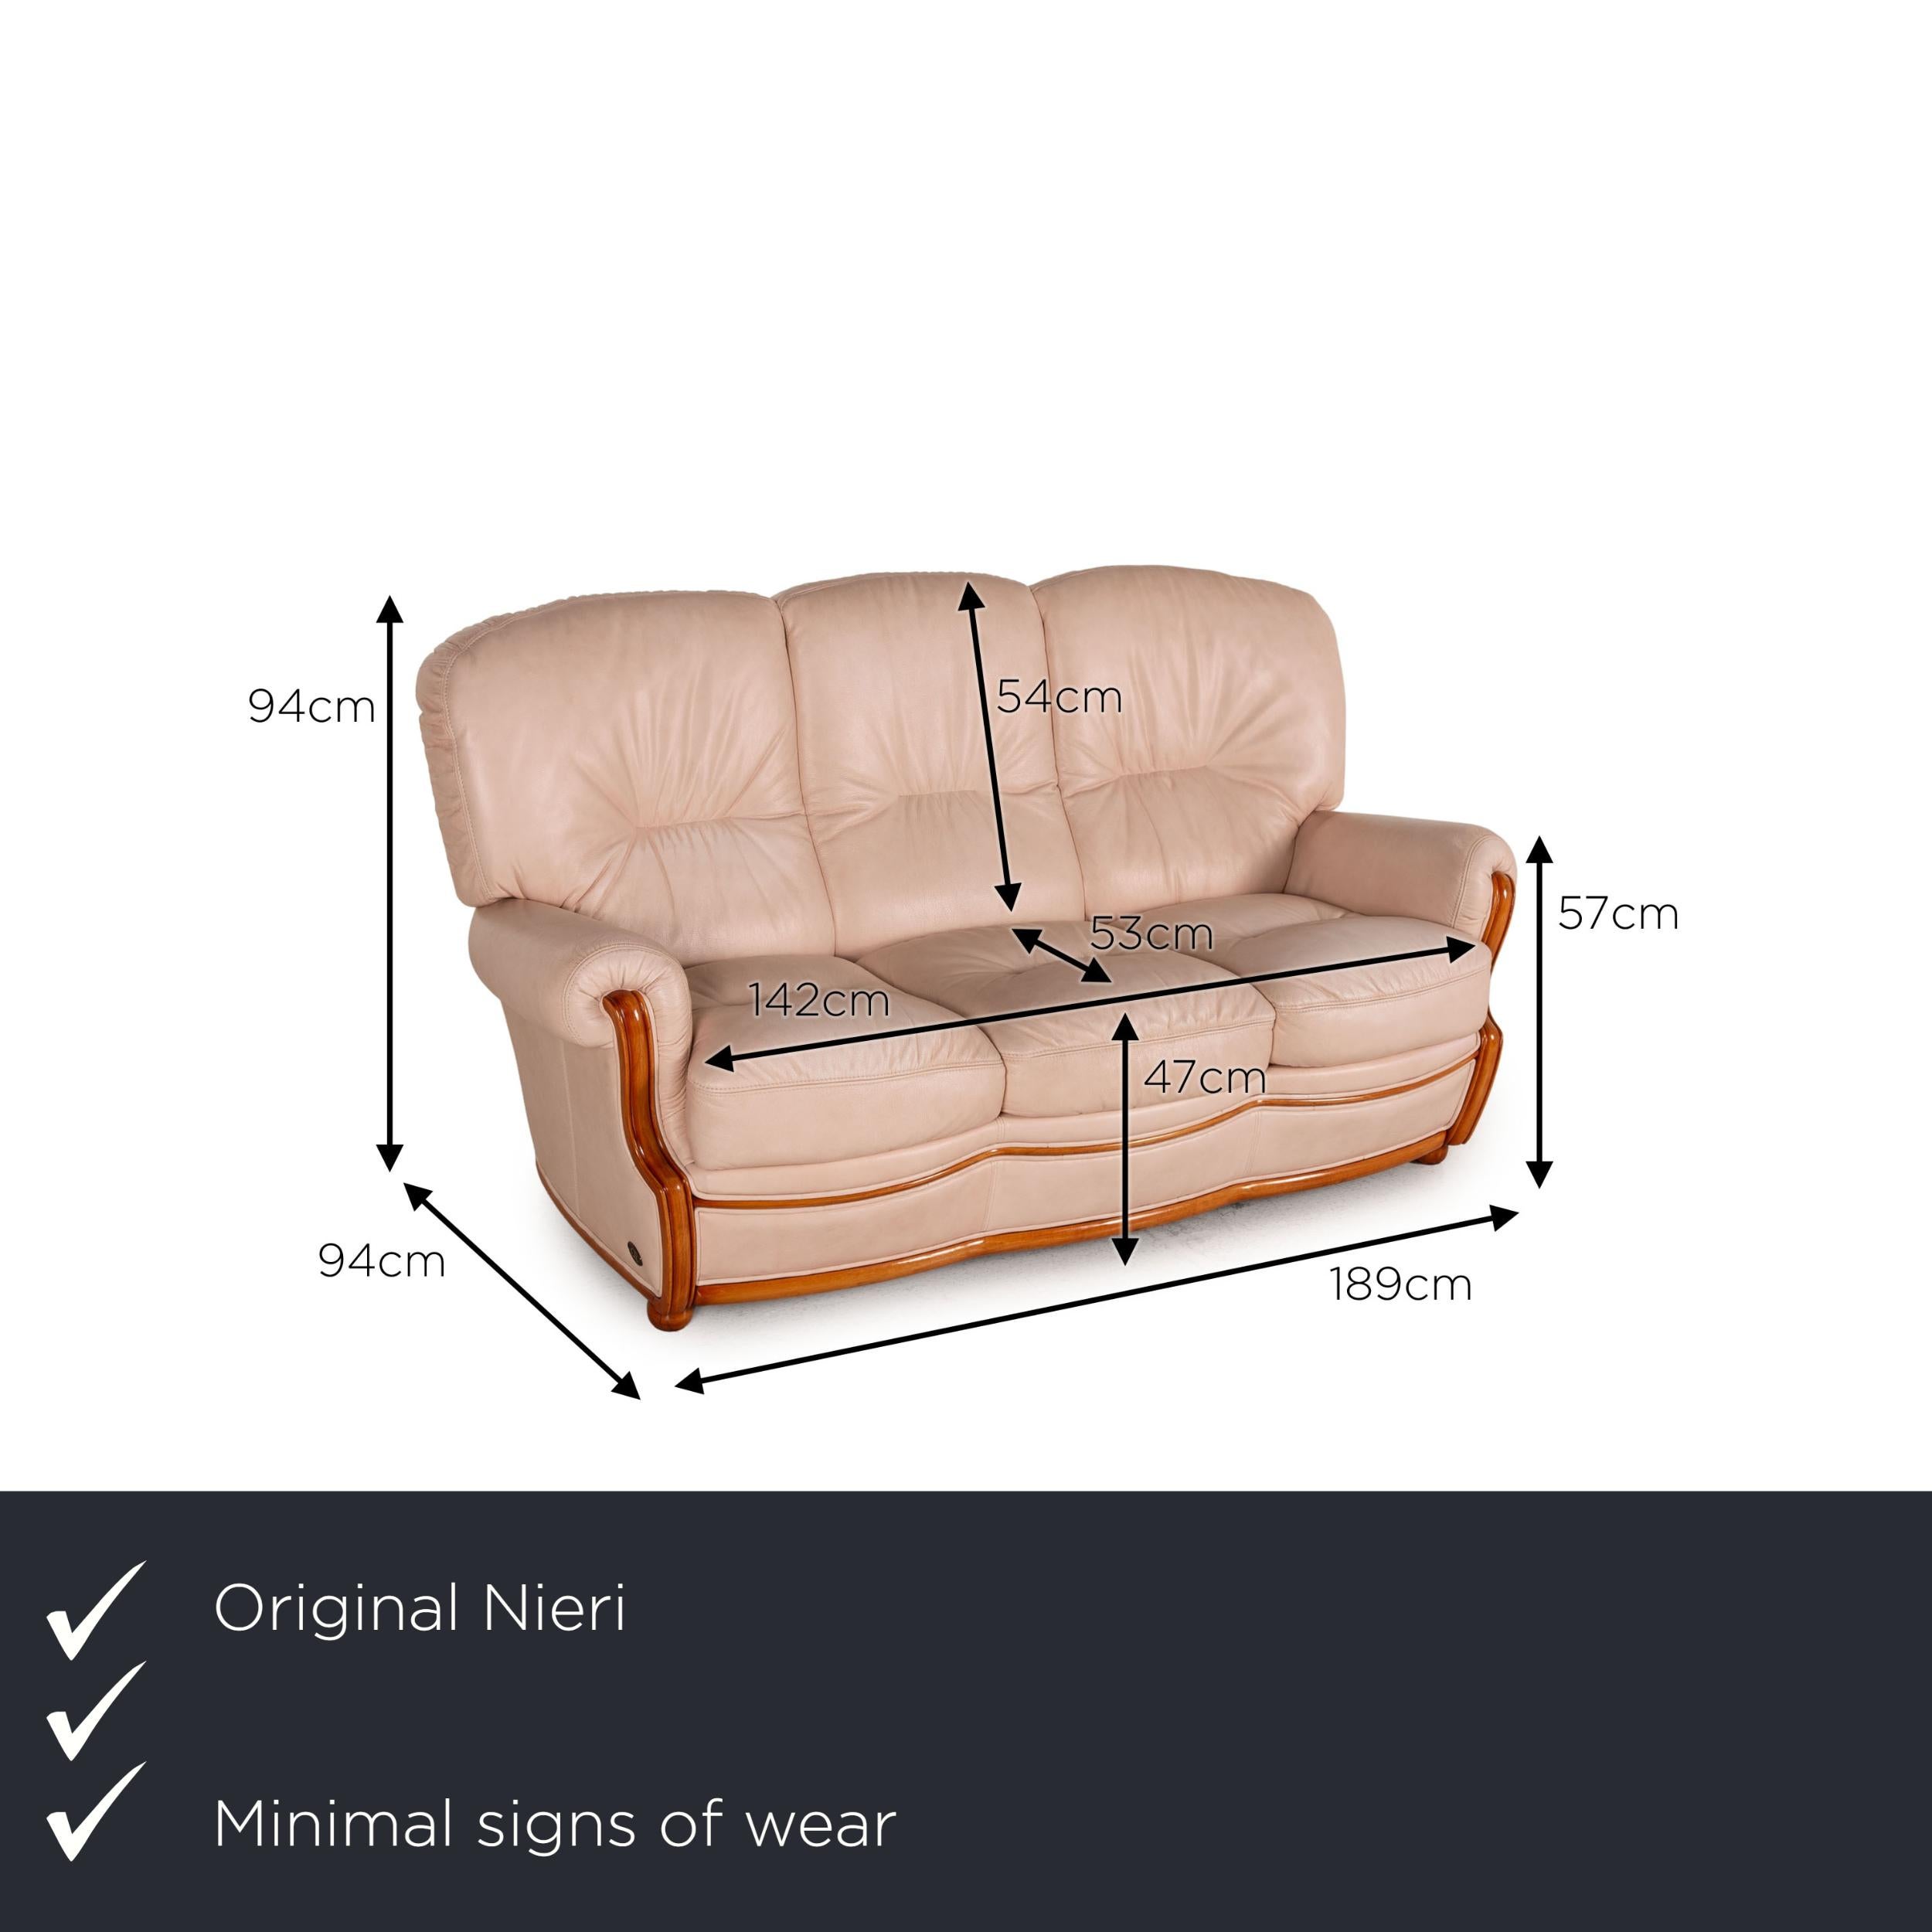 We present to you a Nieri Nevada leather sofa cream three seater couch.
 

 Product measurements in centimeters:
 

Depth: 94
Width: 189
Height: 94
Seat height: 47
Rest height: 57
Seat depth: 53
Seat width: 142
Back height: 54.
   